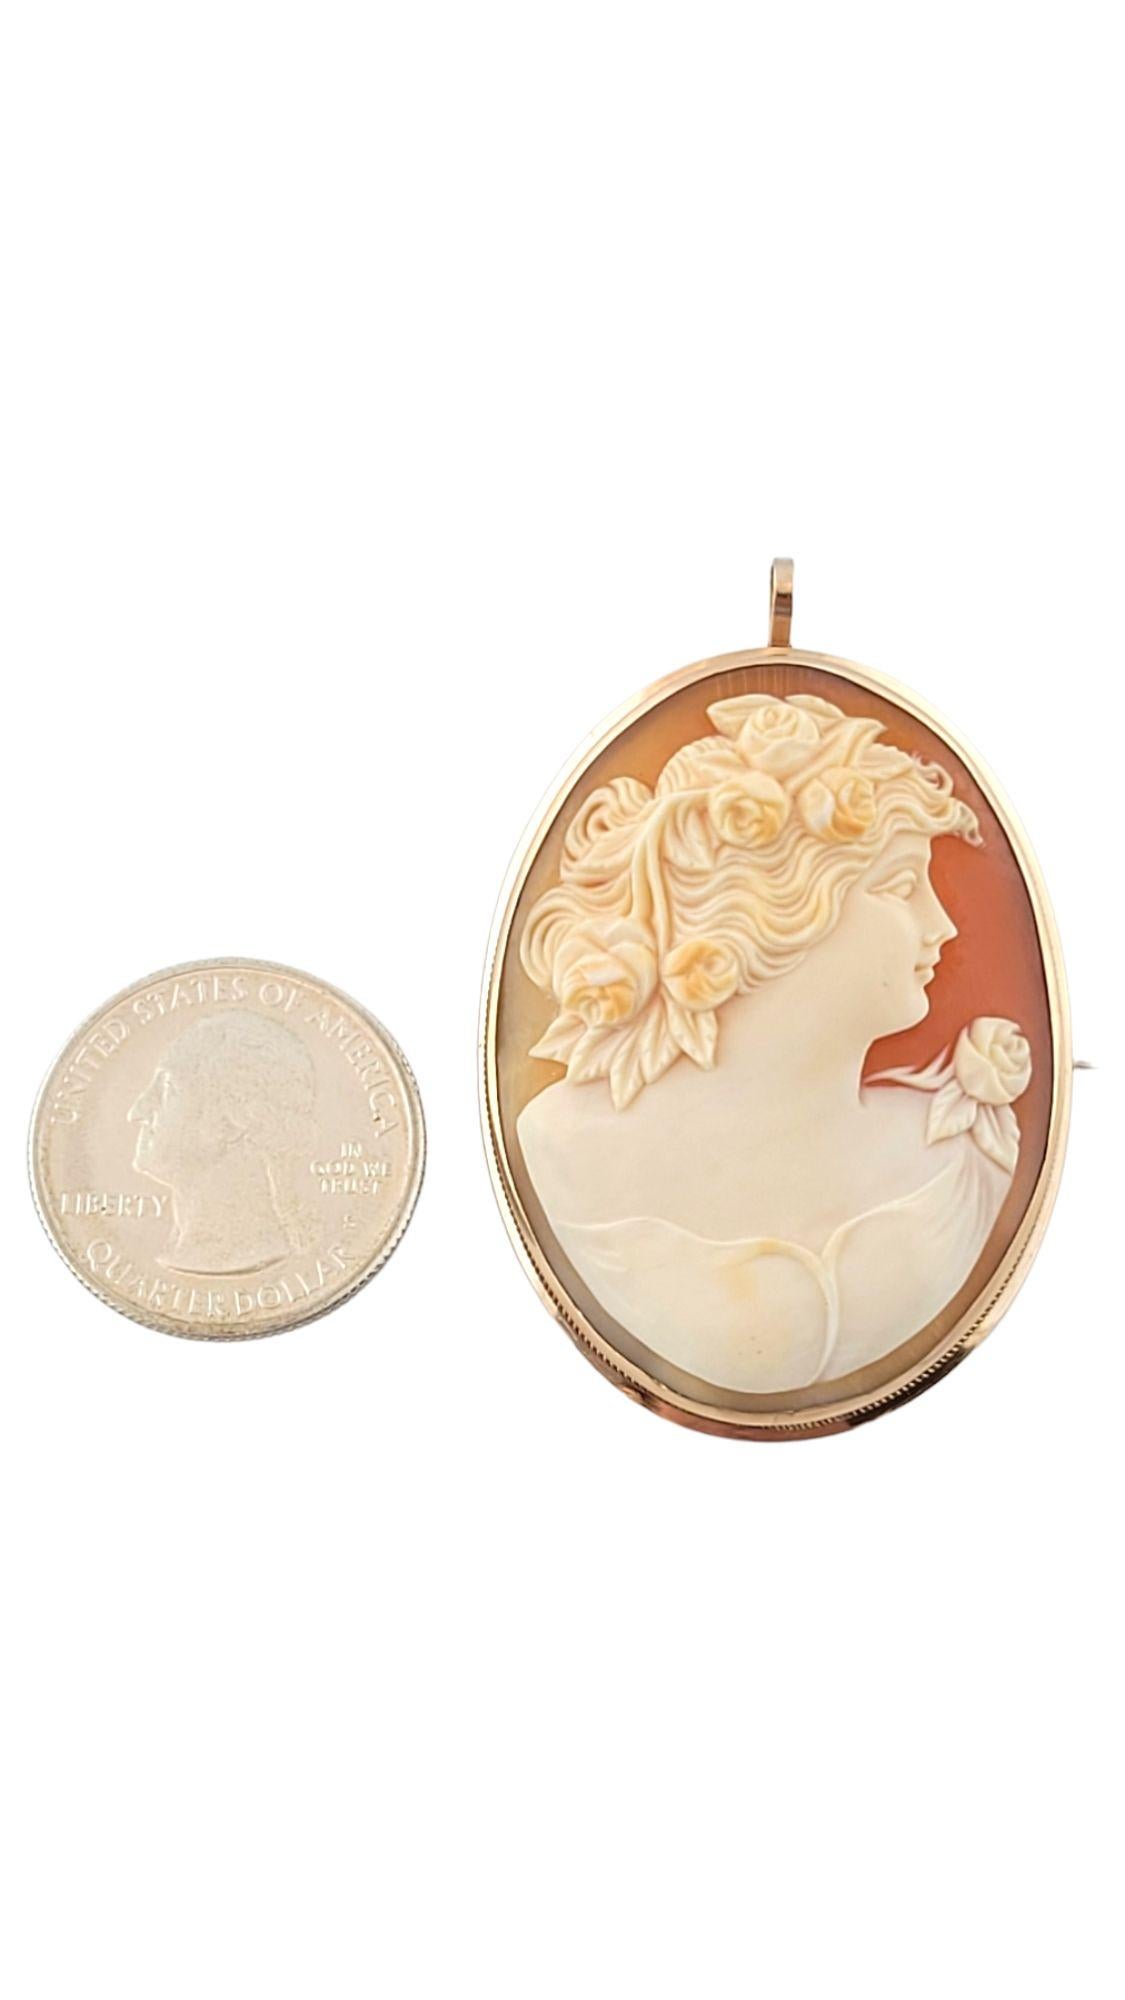 14K Yellow Gold Cameo Pin/Pendant #14568 For Sale 2